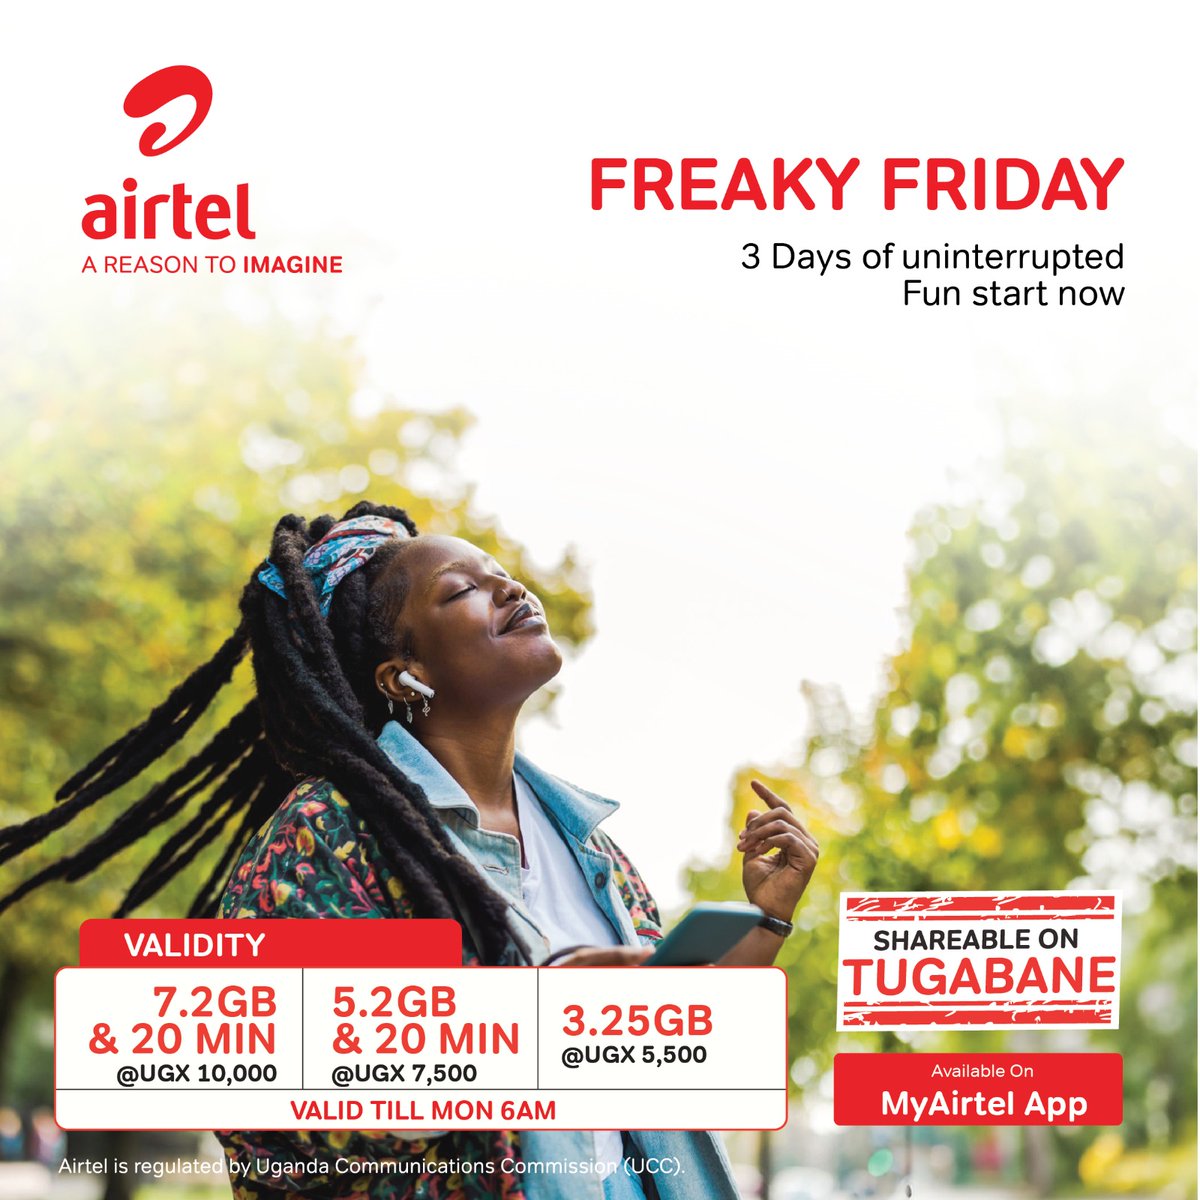 Get  #FreakyFriday valid for 3 days. 

 Dial *100# and choose option 0  to get your preferred bundle or use #MyAirtelApp here airtelafrica.onelink.me/cGyr/qgj4qeu2